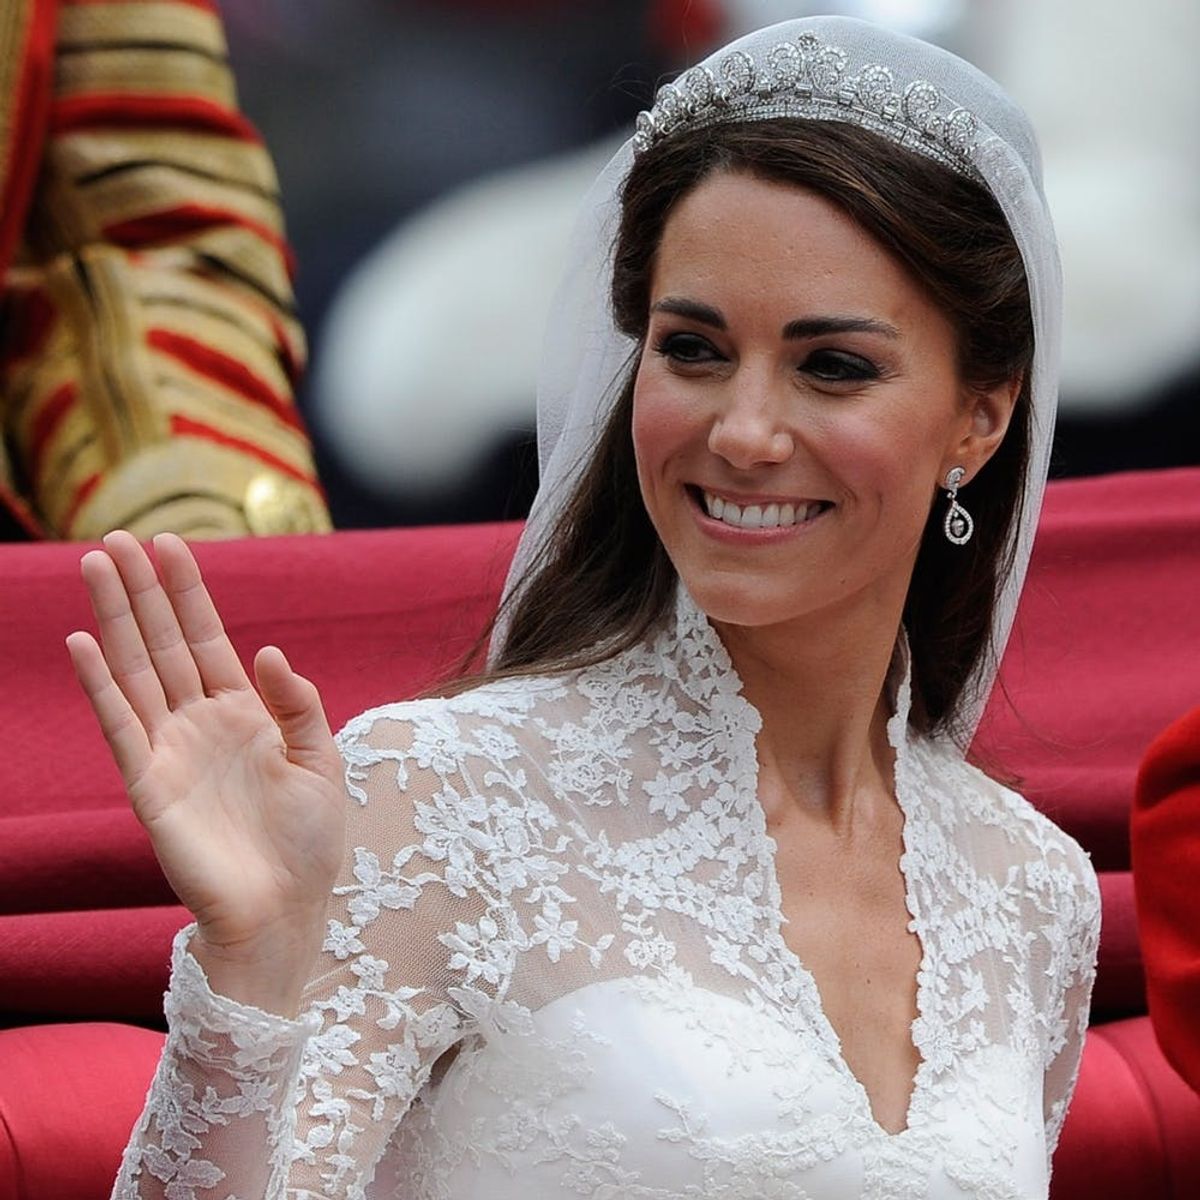 Kate Middleton Had a Second Wedding Dress… Who Knew?